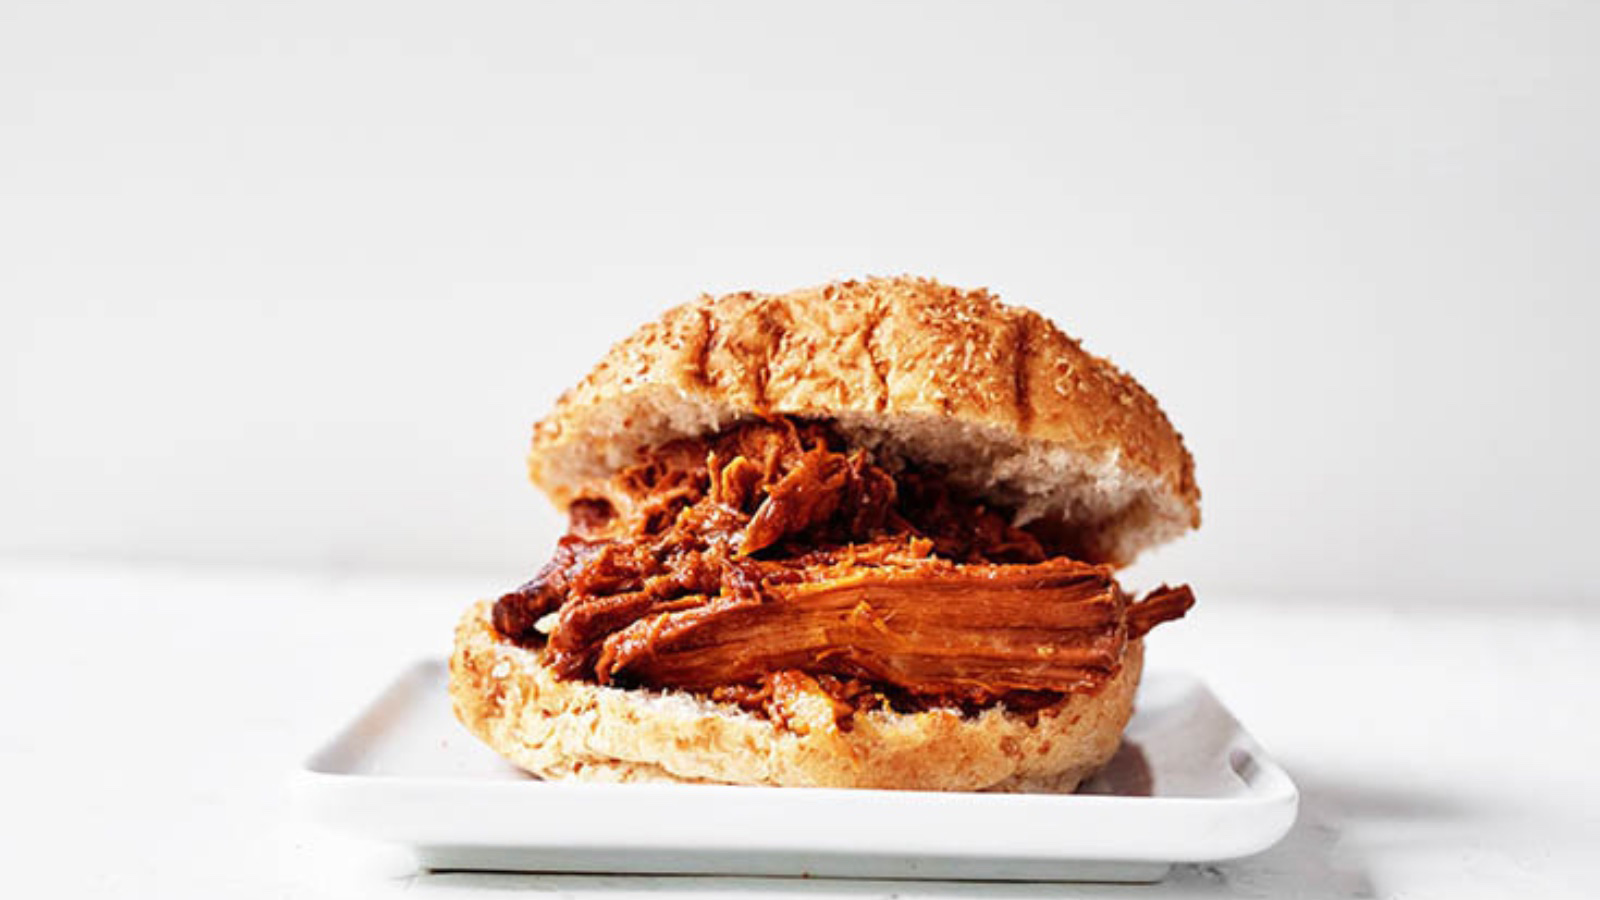 A pulled pork sandwich on a white plate on a white background.